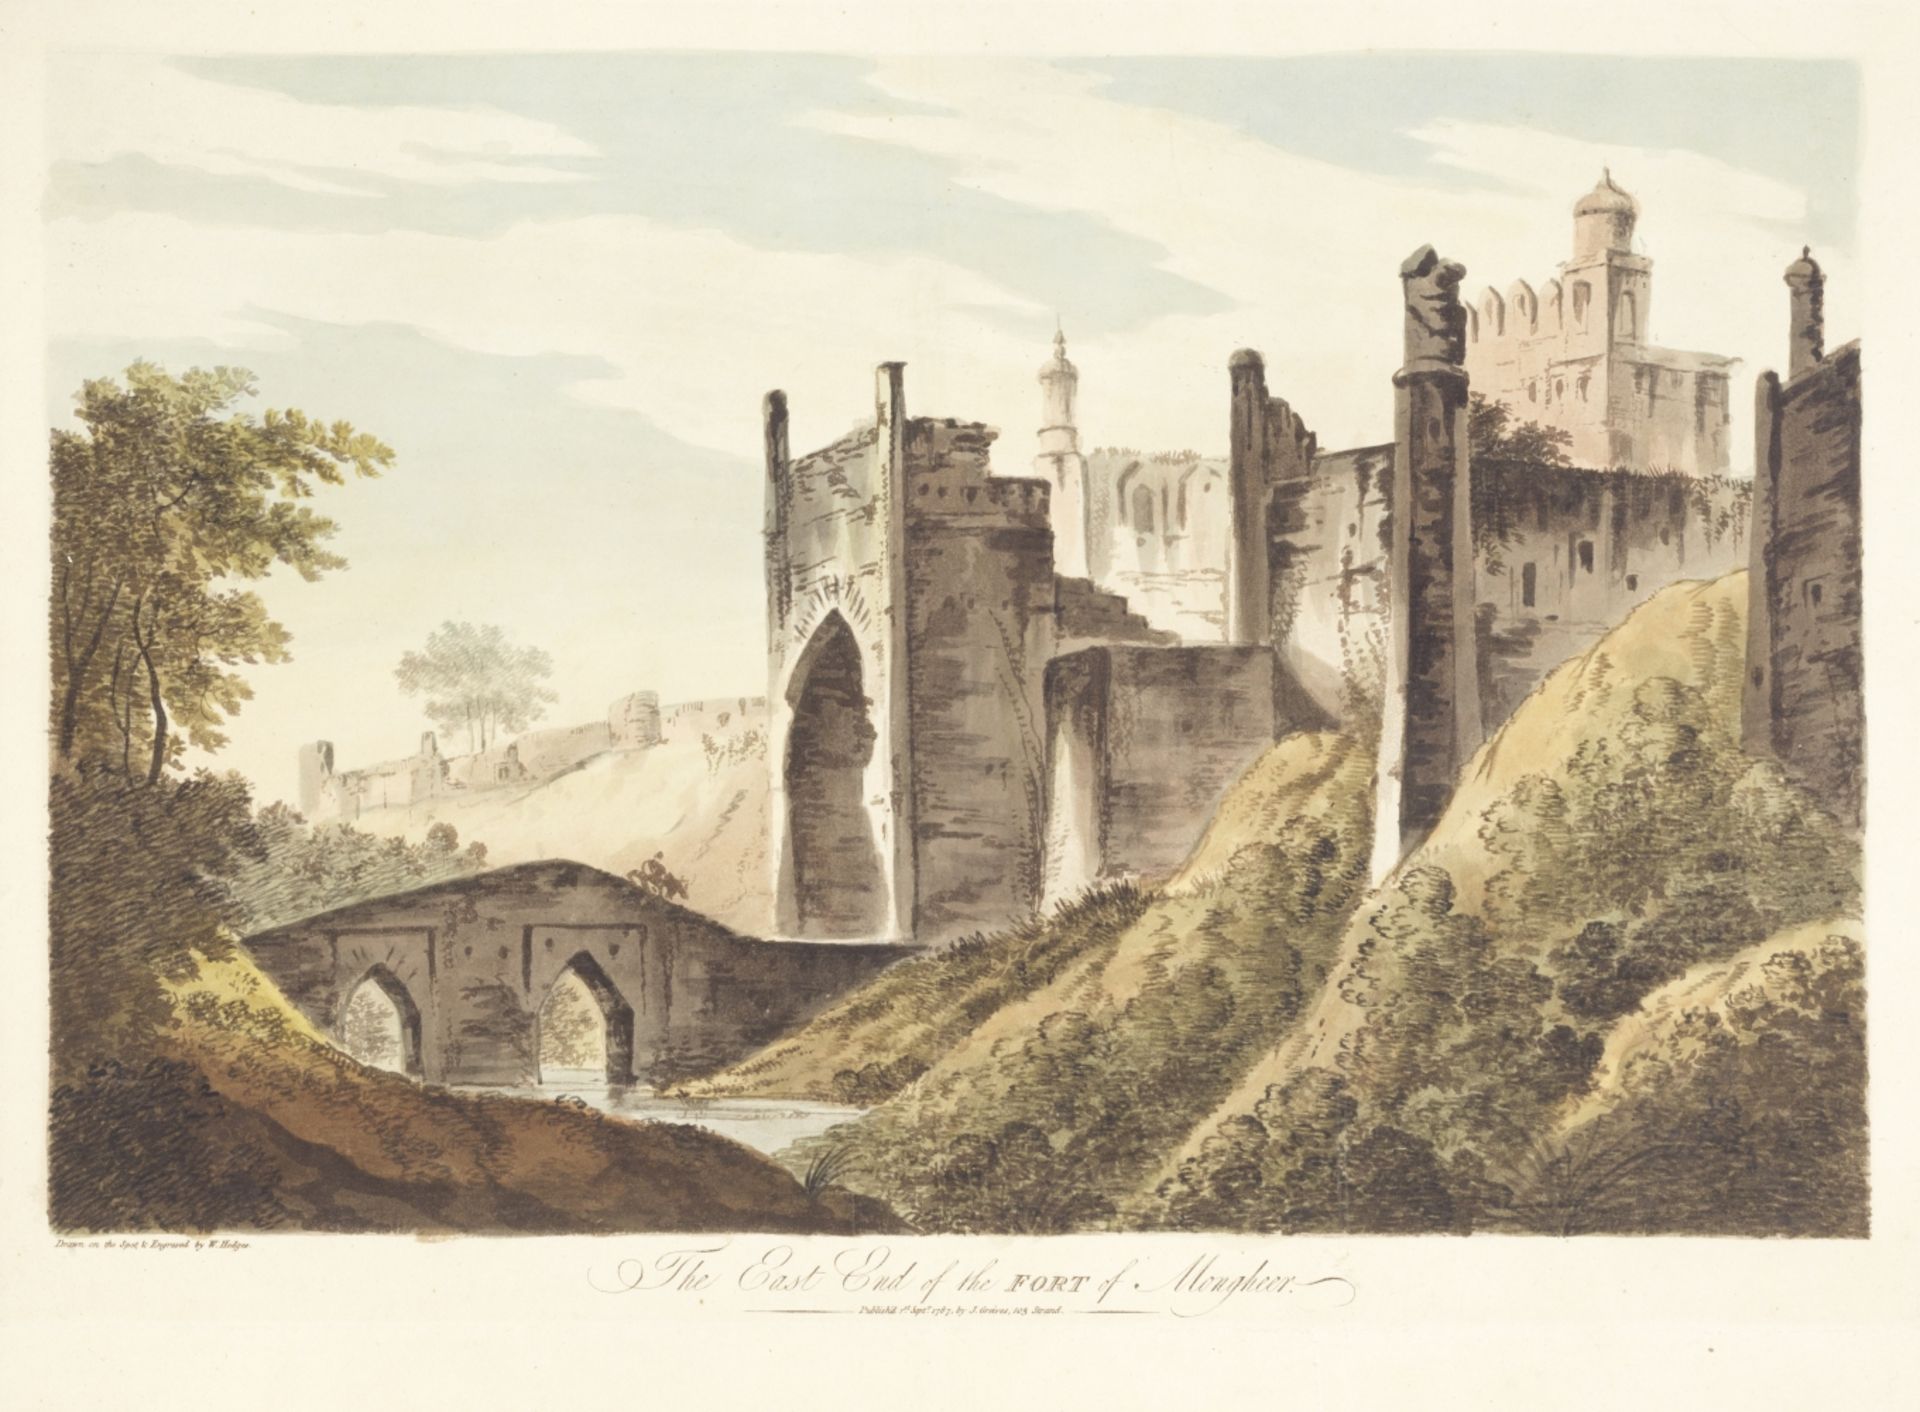 William Hodges, R.A. (London 1744-1797 Devon) 'The East End of the Fort of Mongheer' hand-coloure...